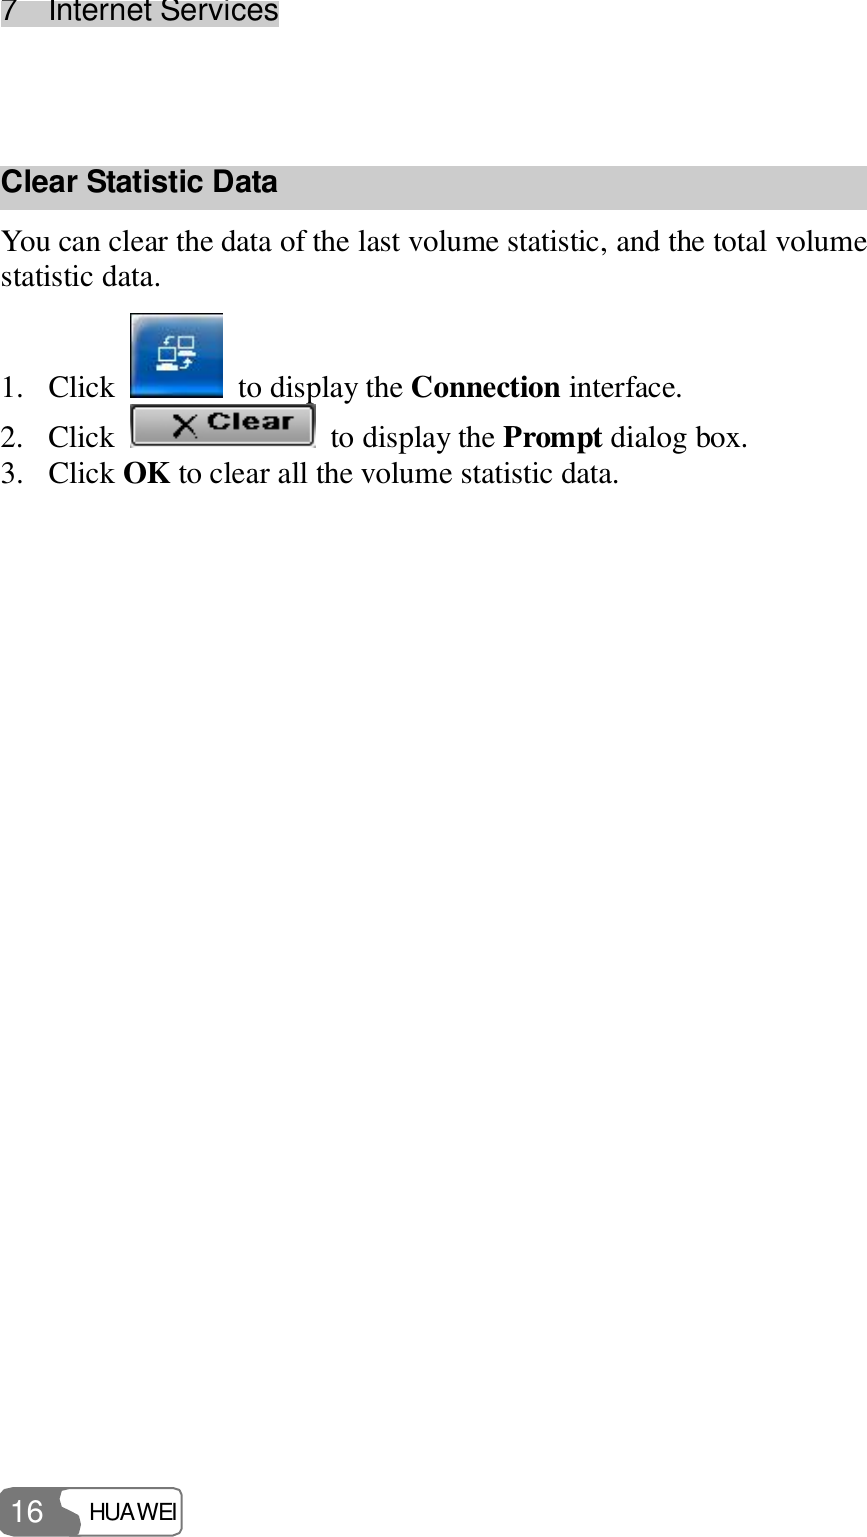 7  Internet Services HUAWEI  16  Clear Statistic Data You can clear the data of the last volume statistic, and the total volume statistic data. 1. Click   to display the Connection interface. 2. Click   to display the Prompt dialog box. 3. Click OK to clear all the volume statistic data.  